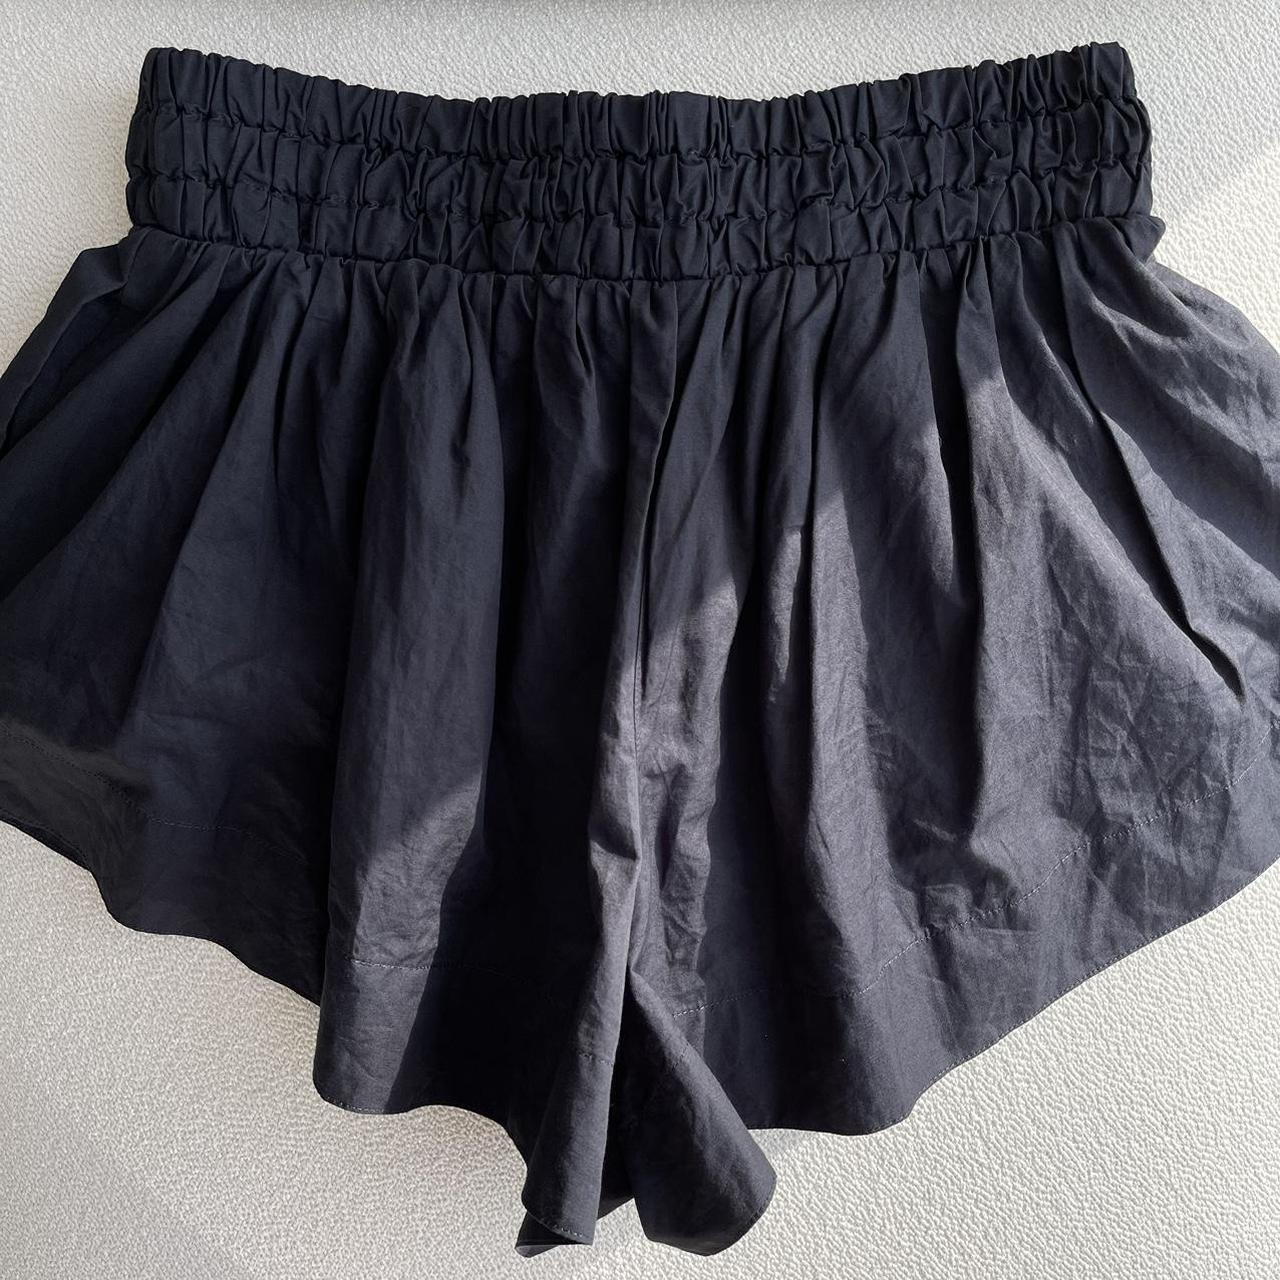 Vivienne Westwood Women's Black and Navy Shorts (4)